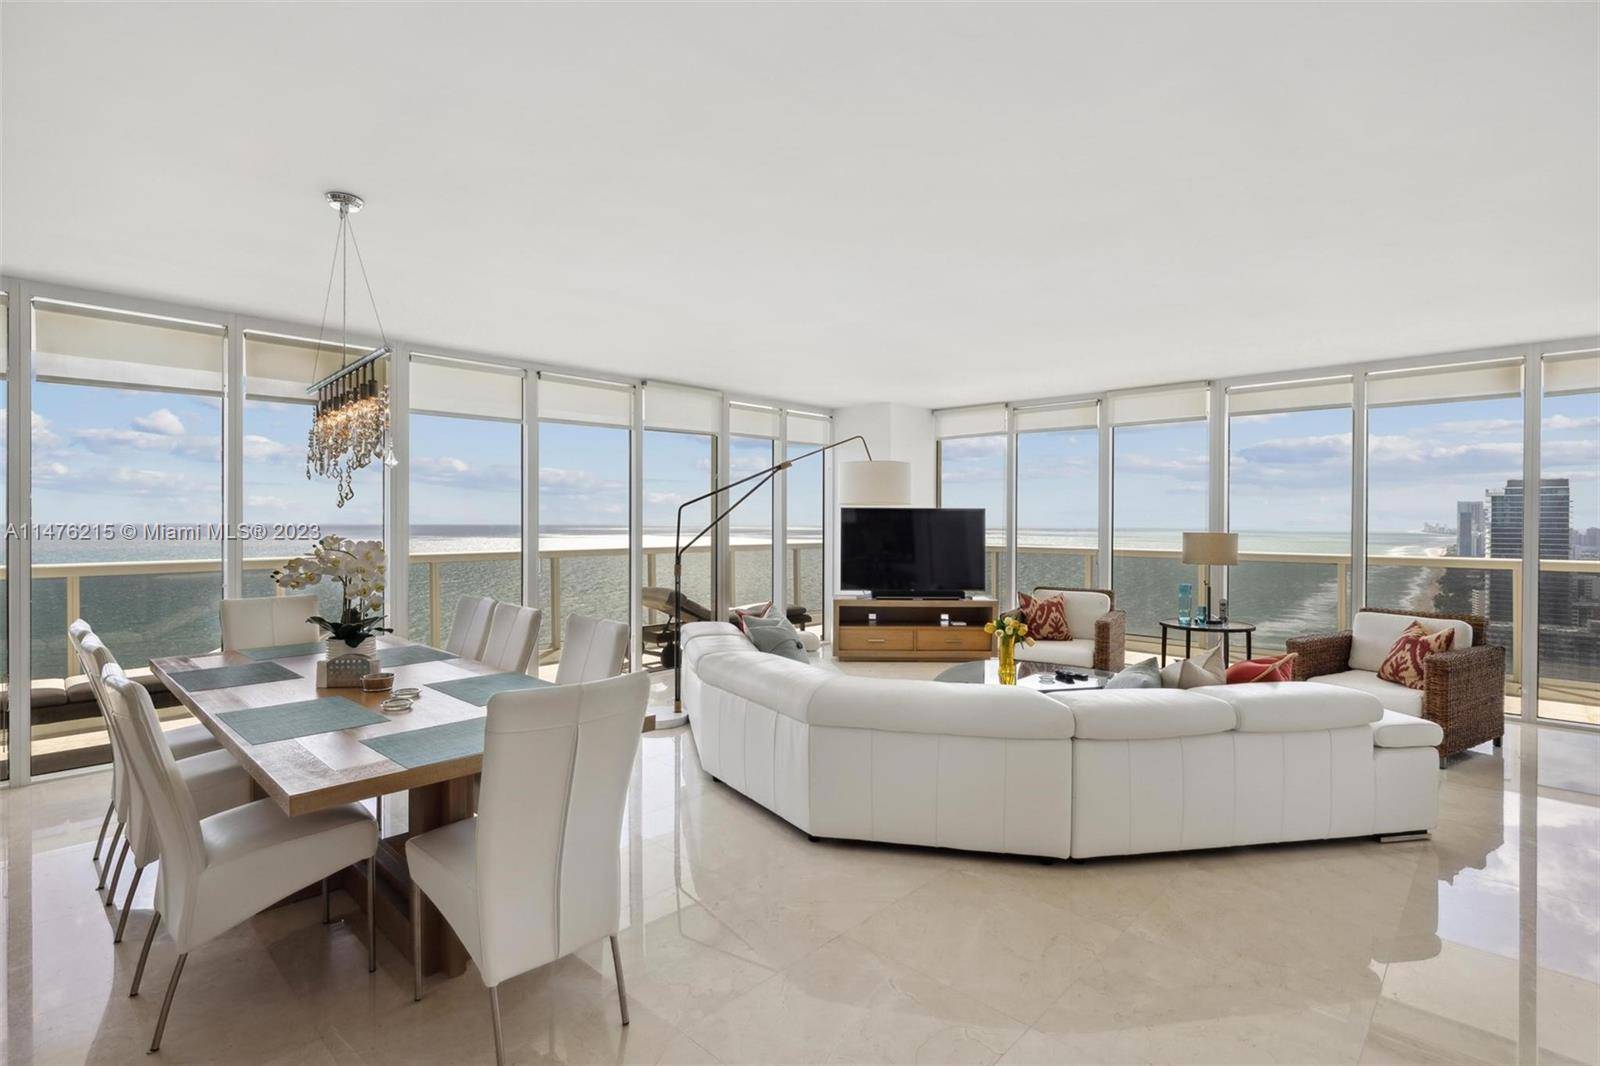 Breathtaking fully furnished Corner unit, South east direct ocean and Intracoastal views await you from this 41st floor.